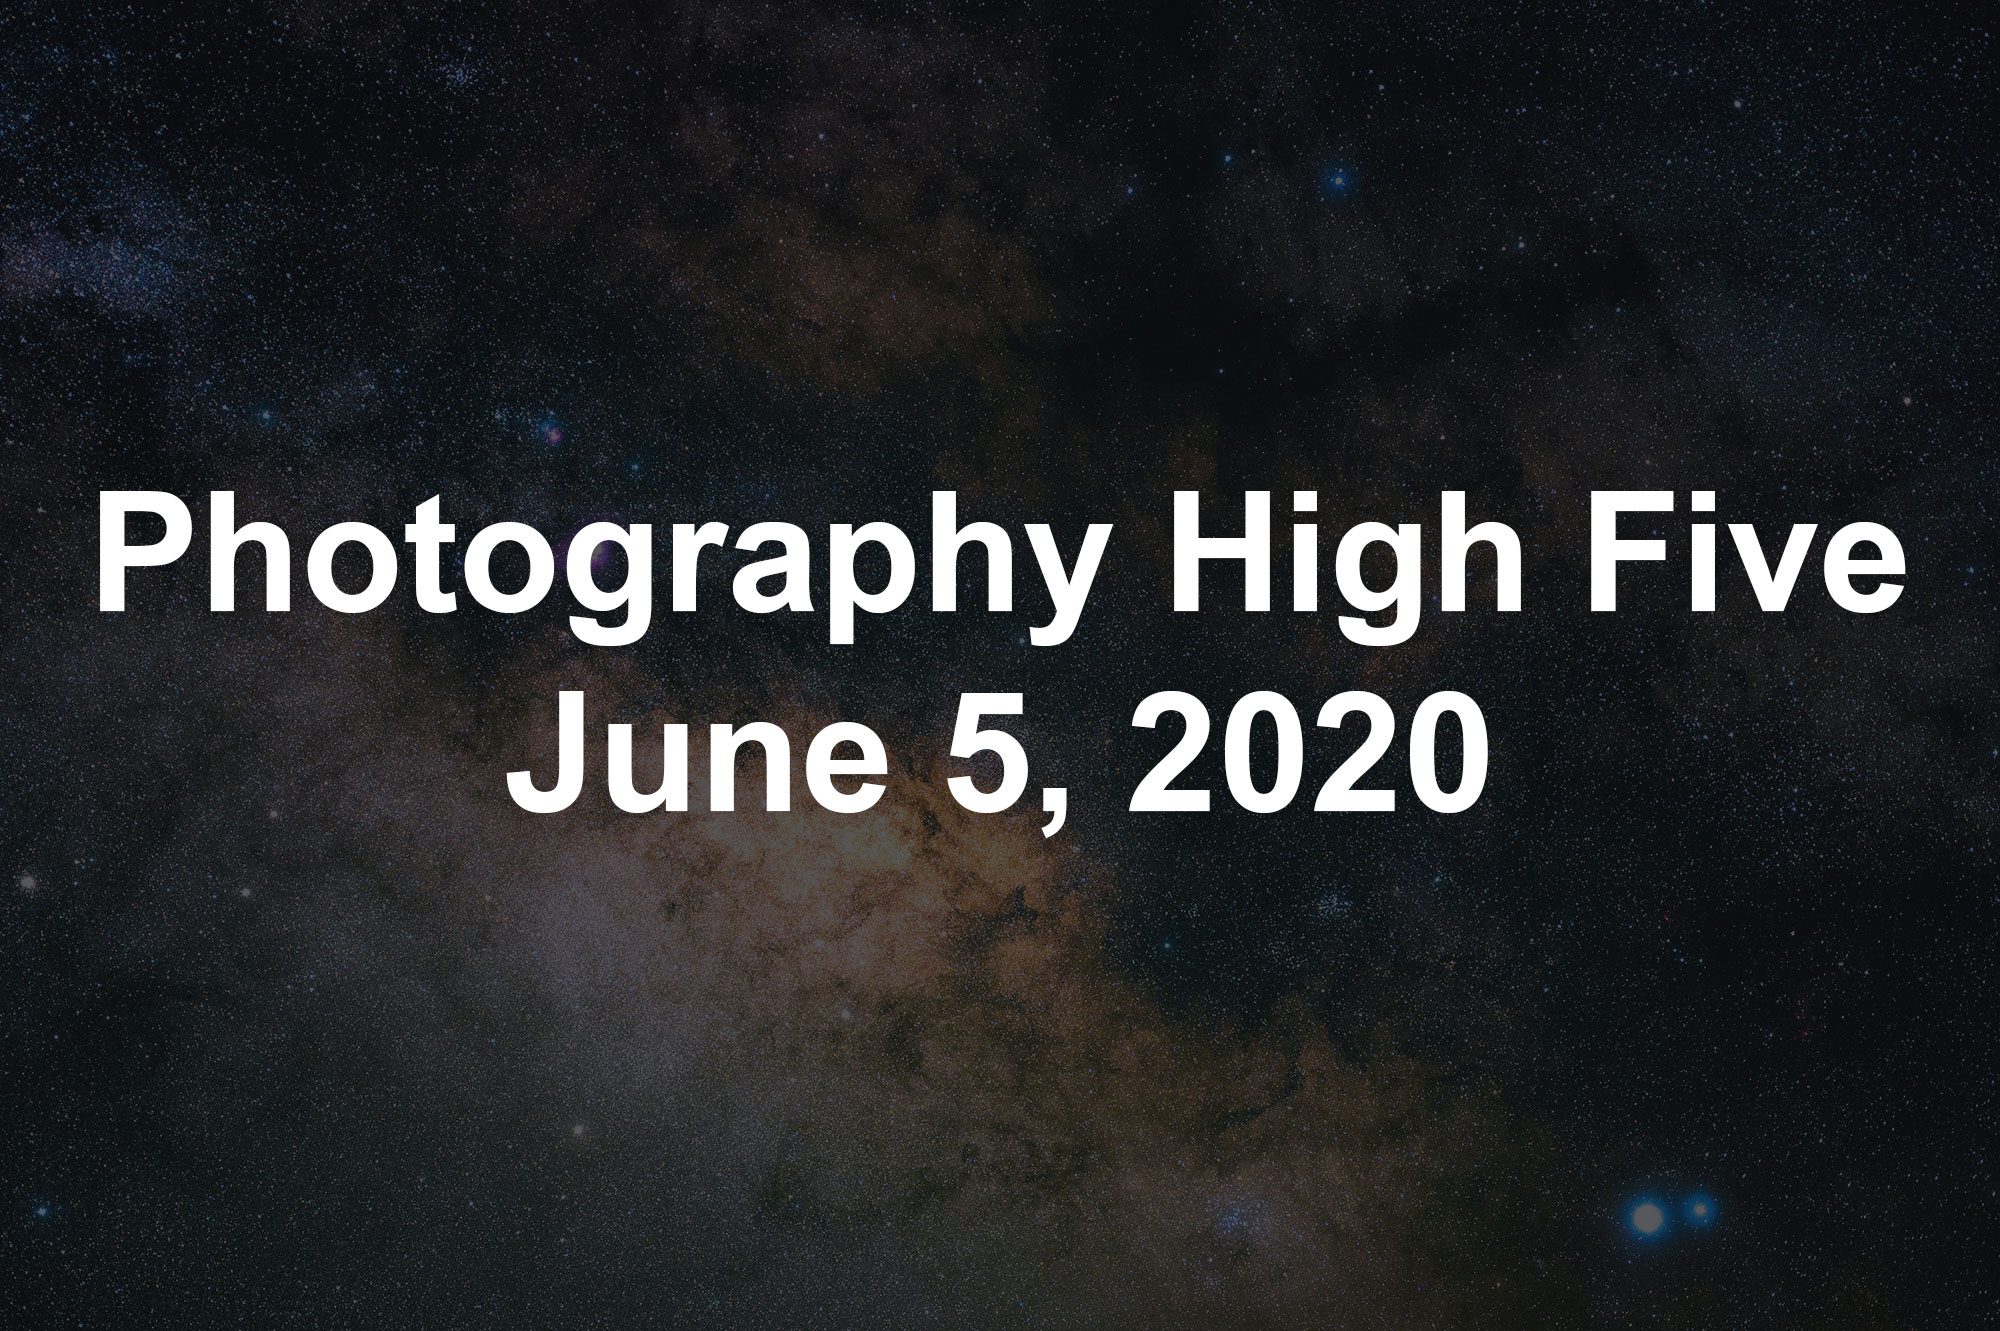 Photography High Five June 5, 2020